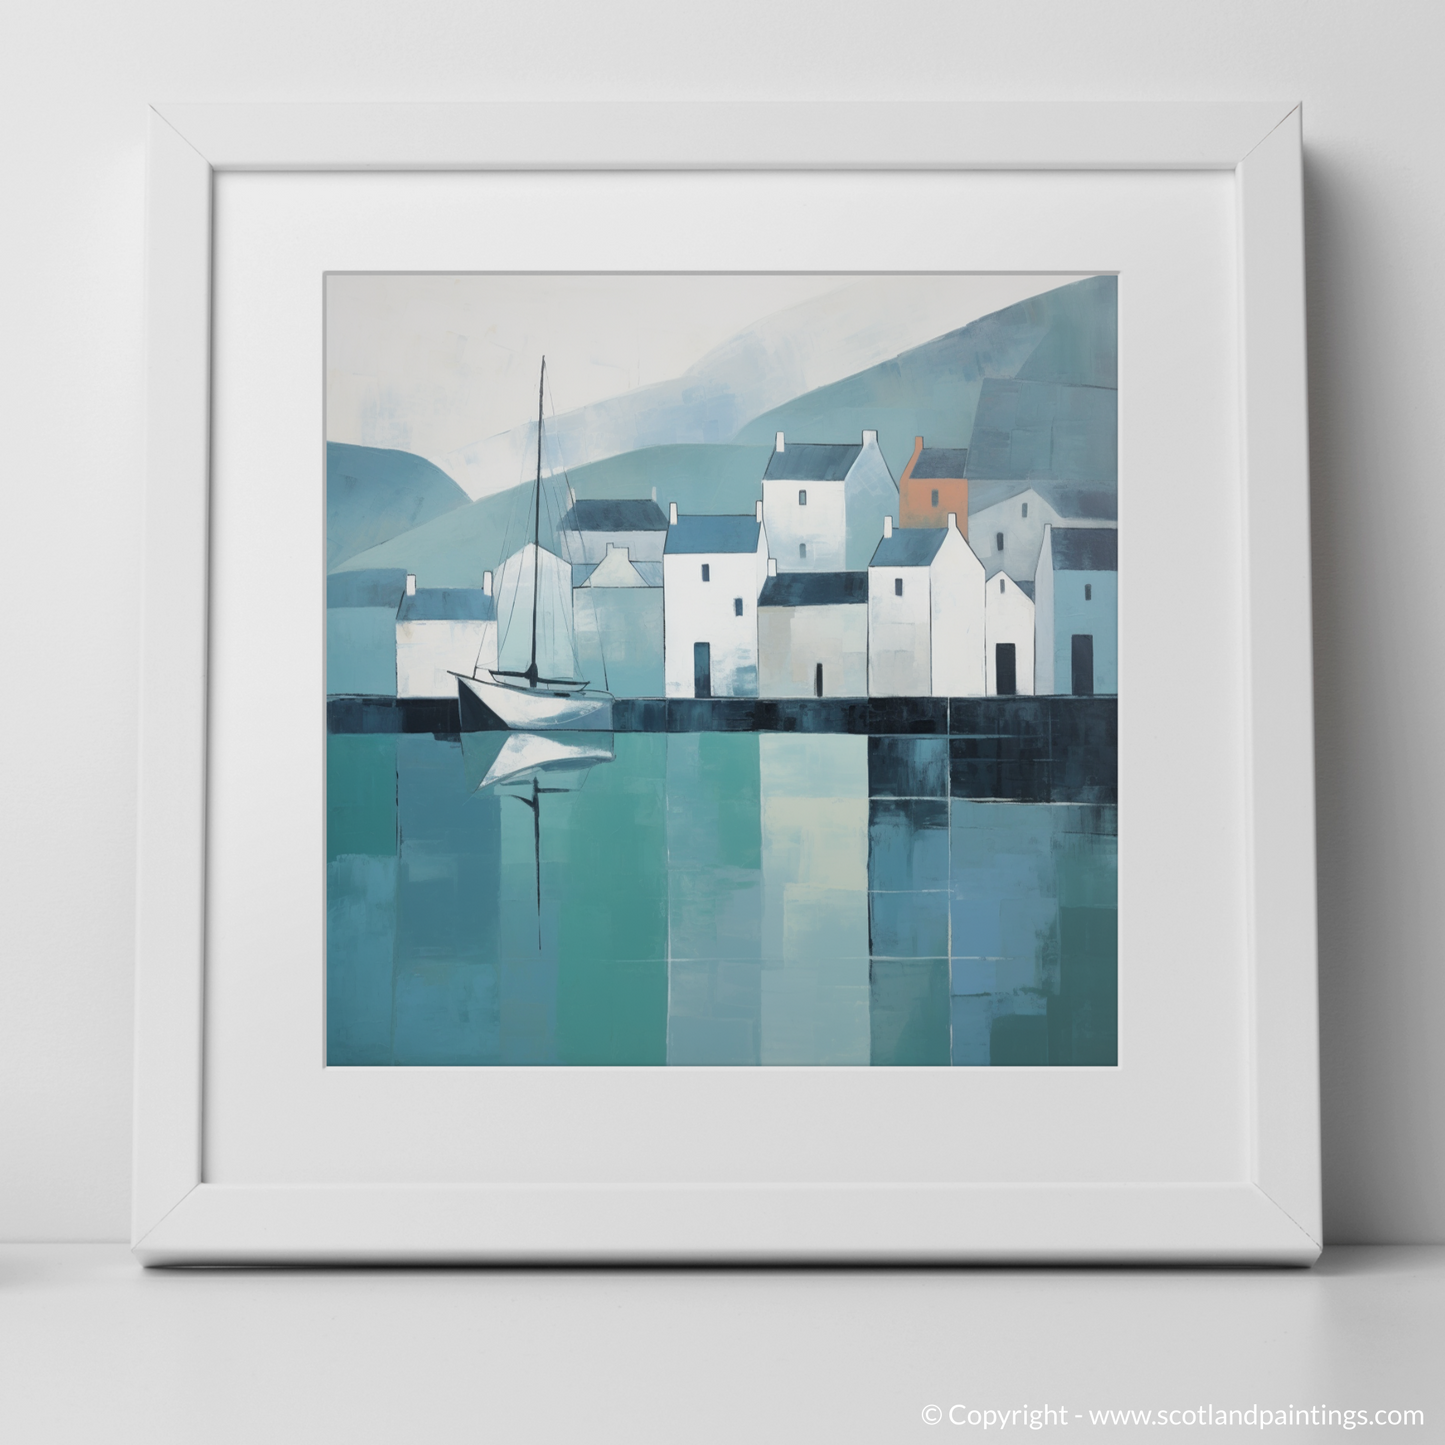 Serenity at Portree Harbour: A Minimalist Tribute